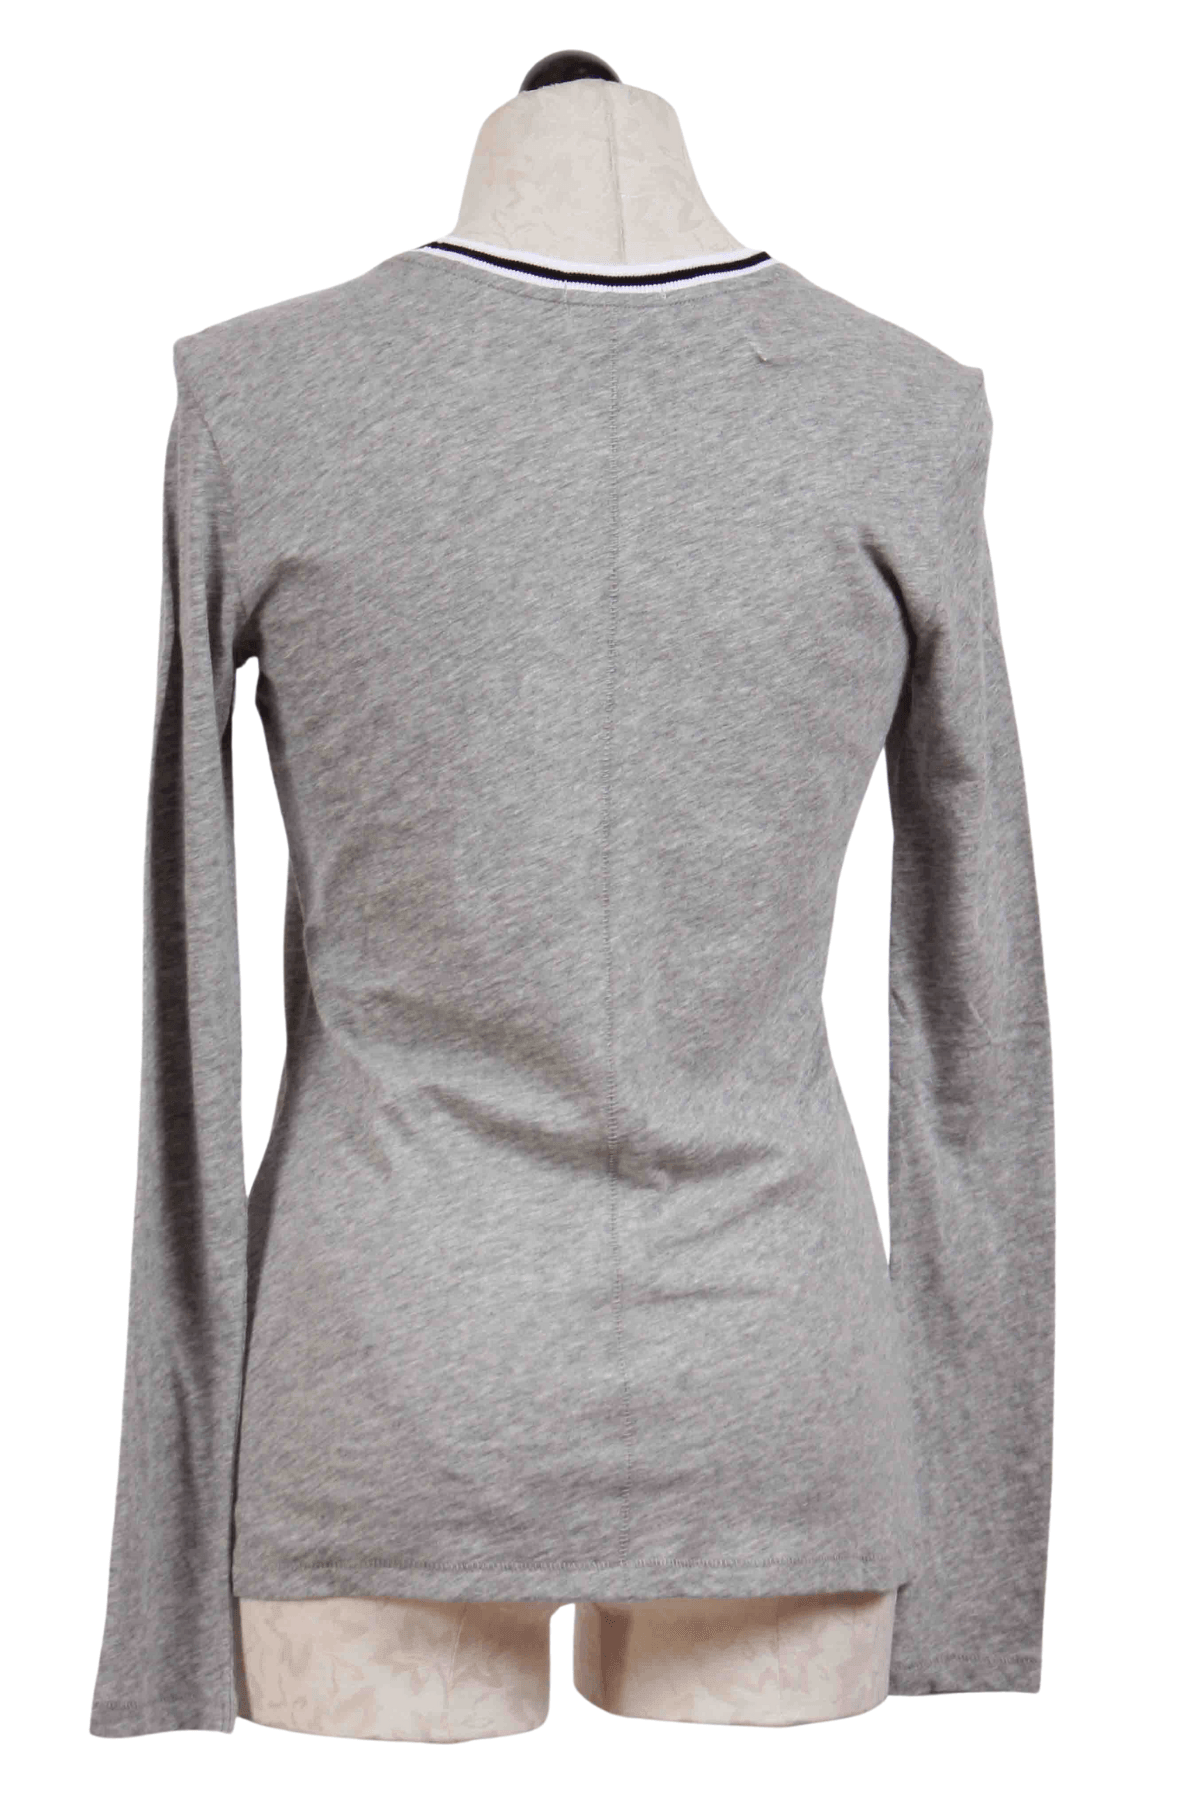 back view of Grey Heather Long Sleeve Tipped Ringer Tee by Goldie Tees